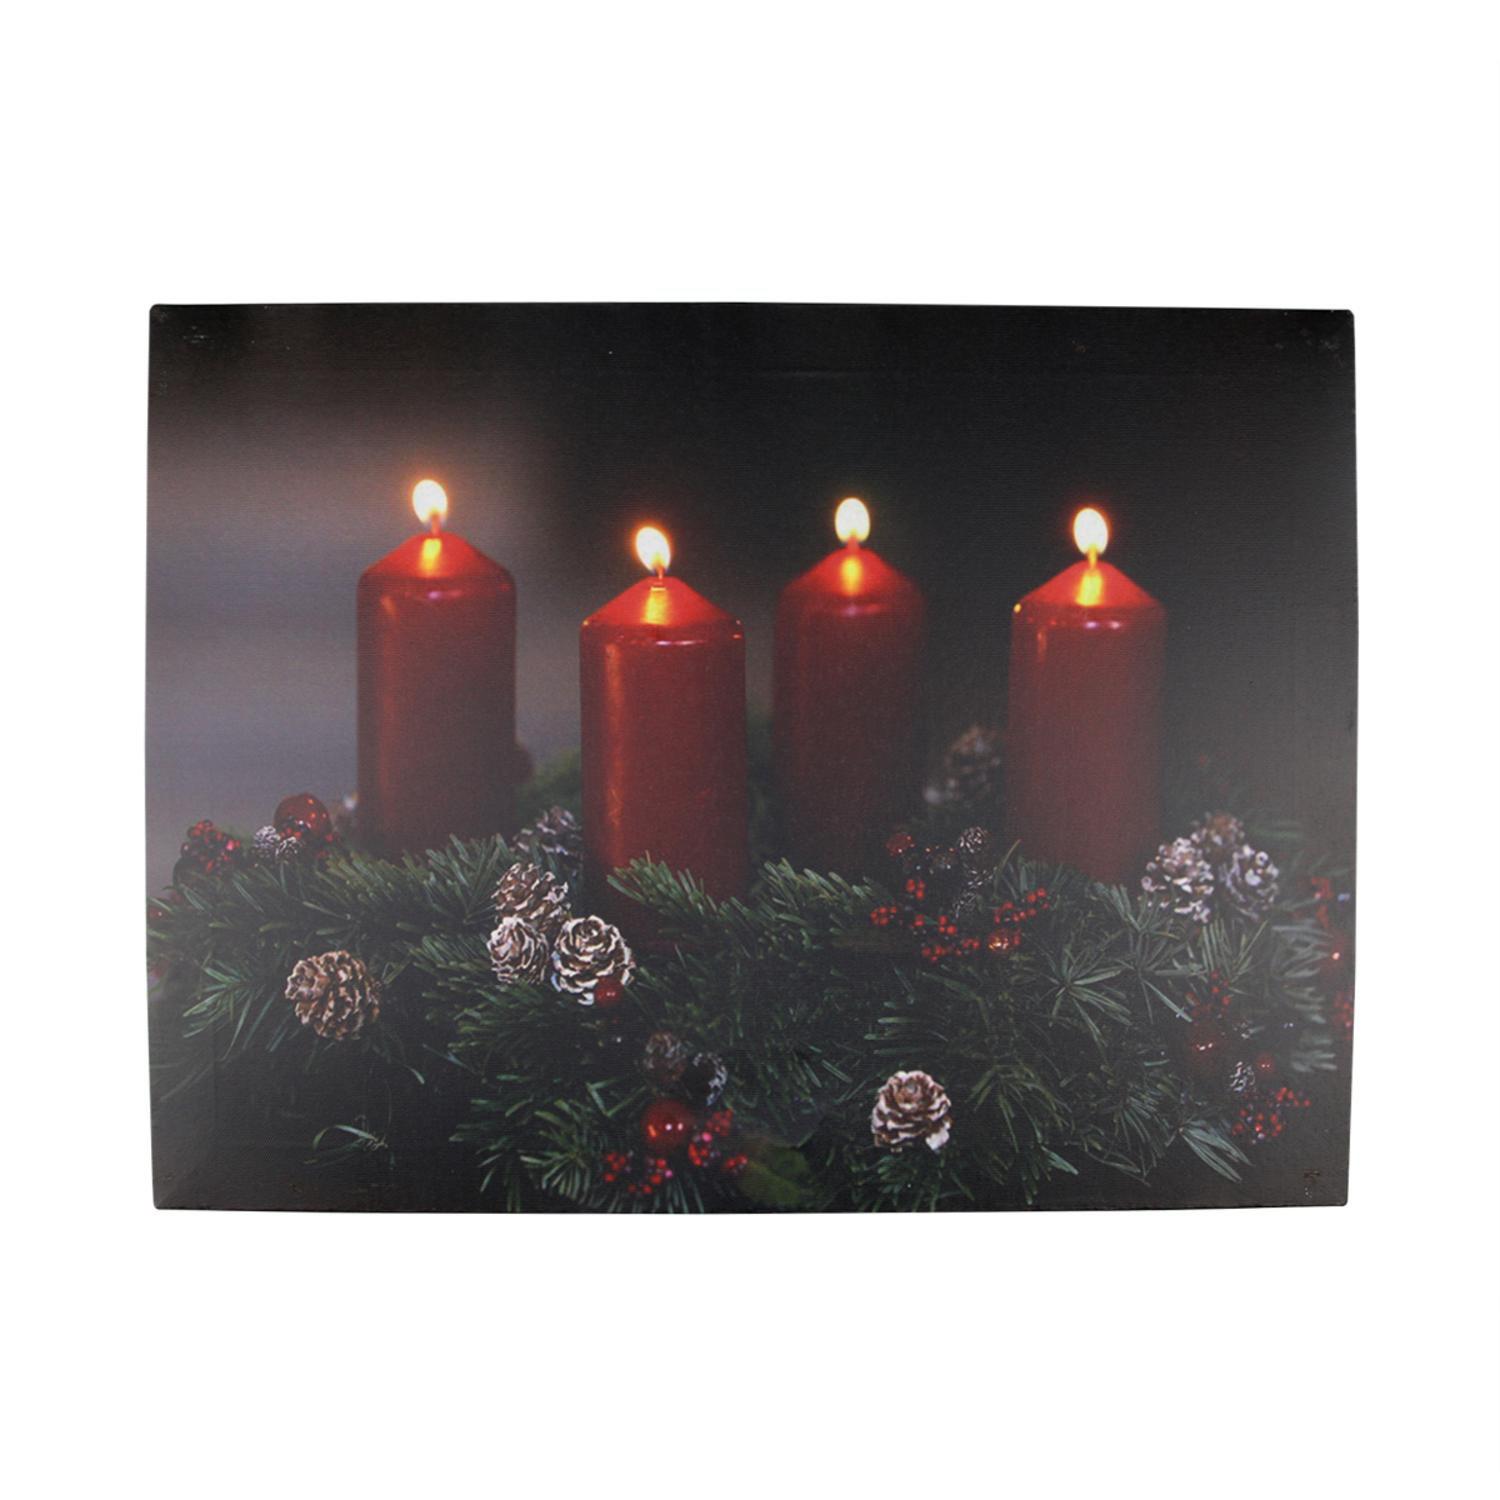 northlight pre-lit red and black led flickering candle christmas wall art 12" x 15.75"